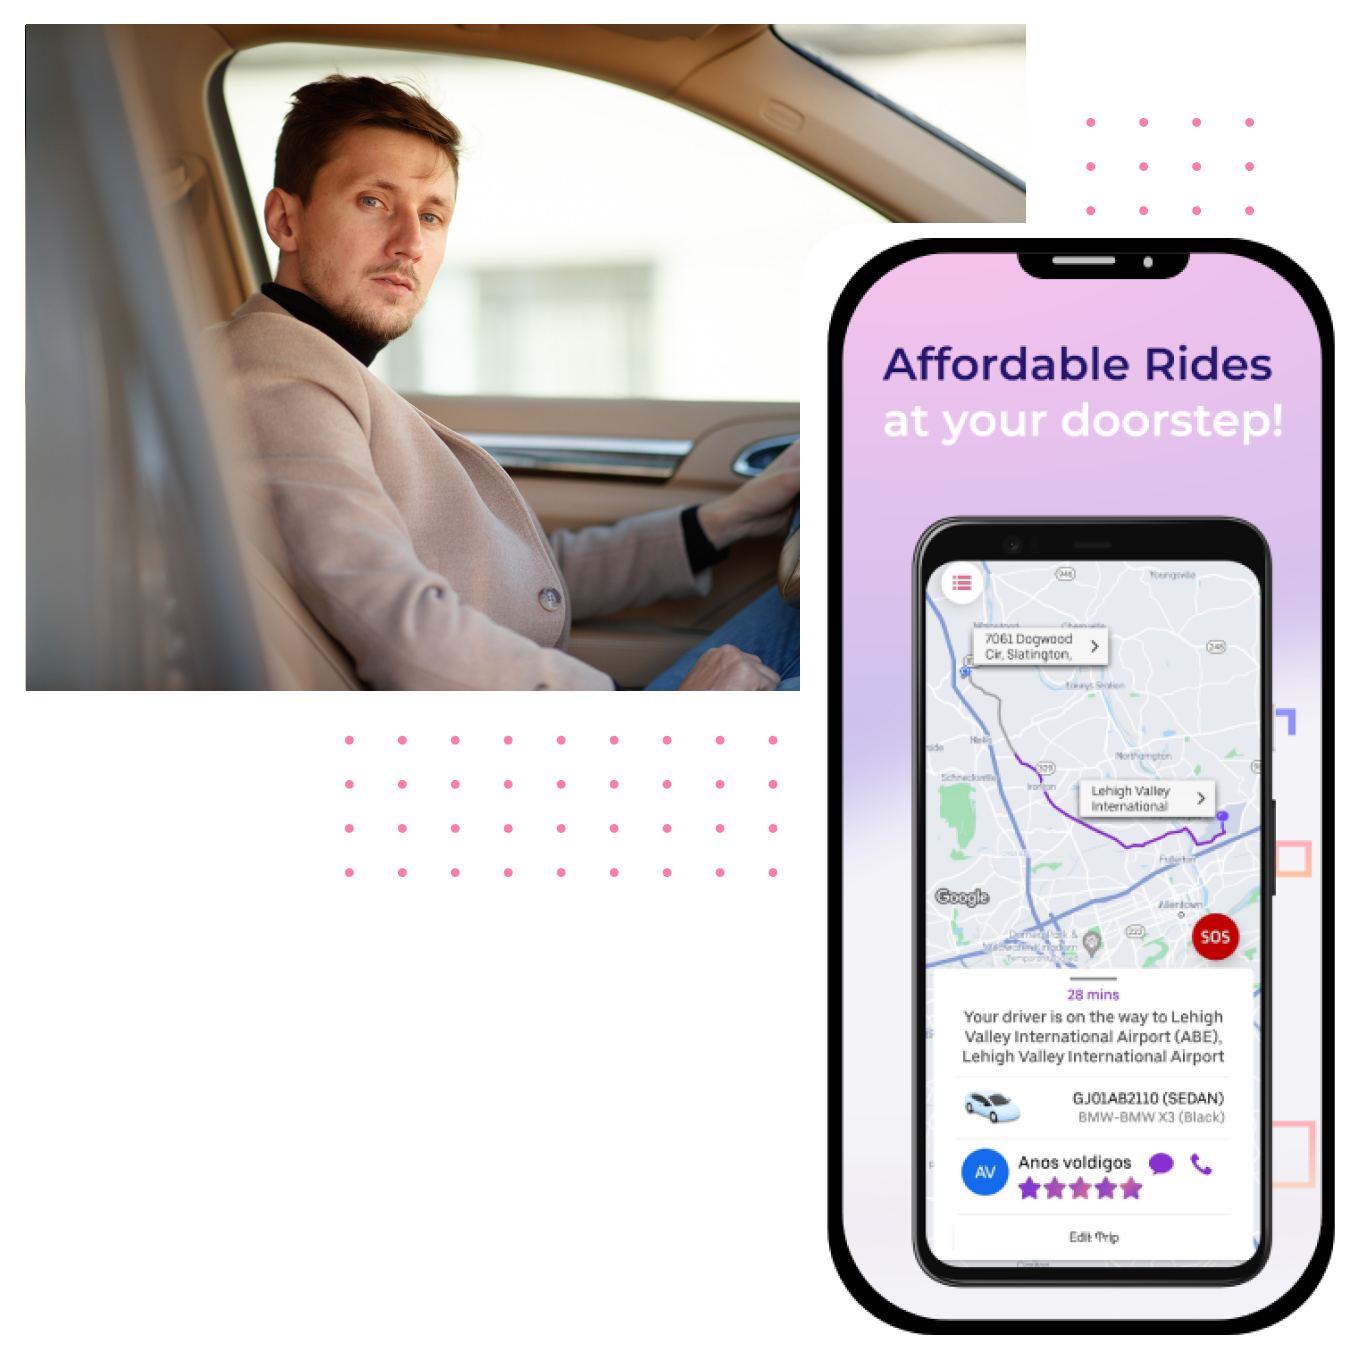 Affordable Auto Rides at Your Doorstep with Uber Auto